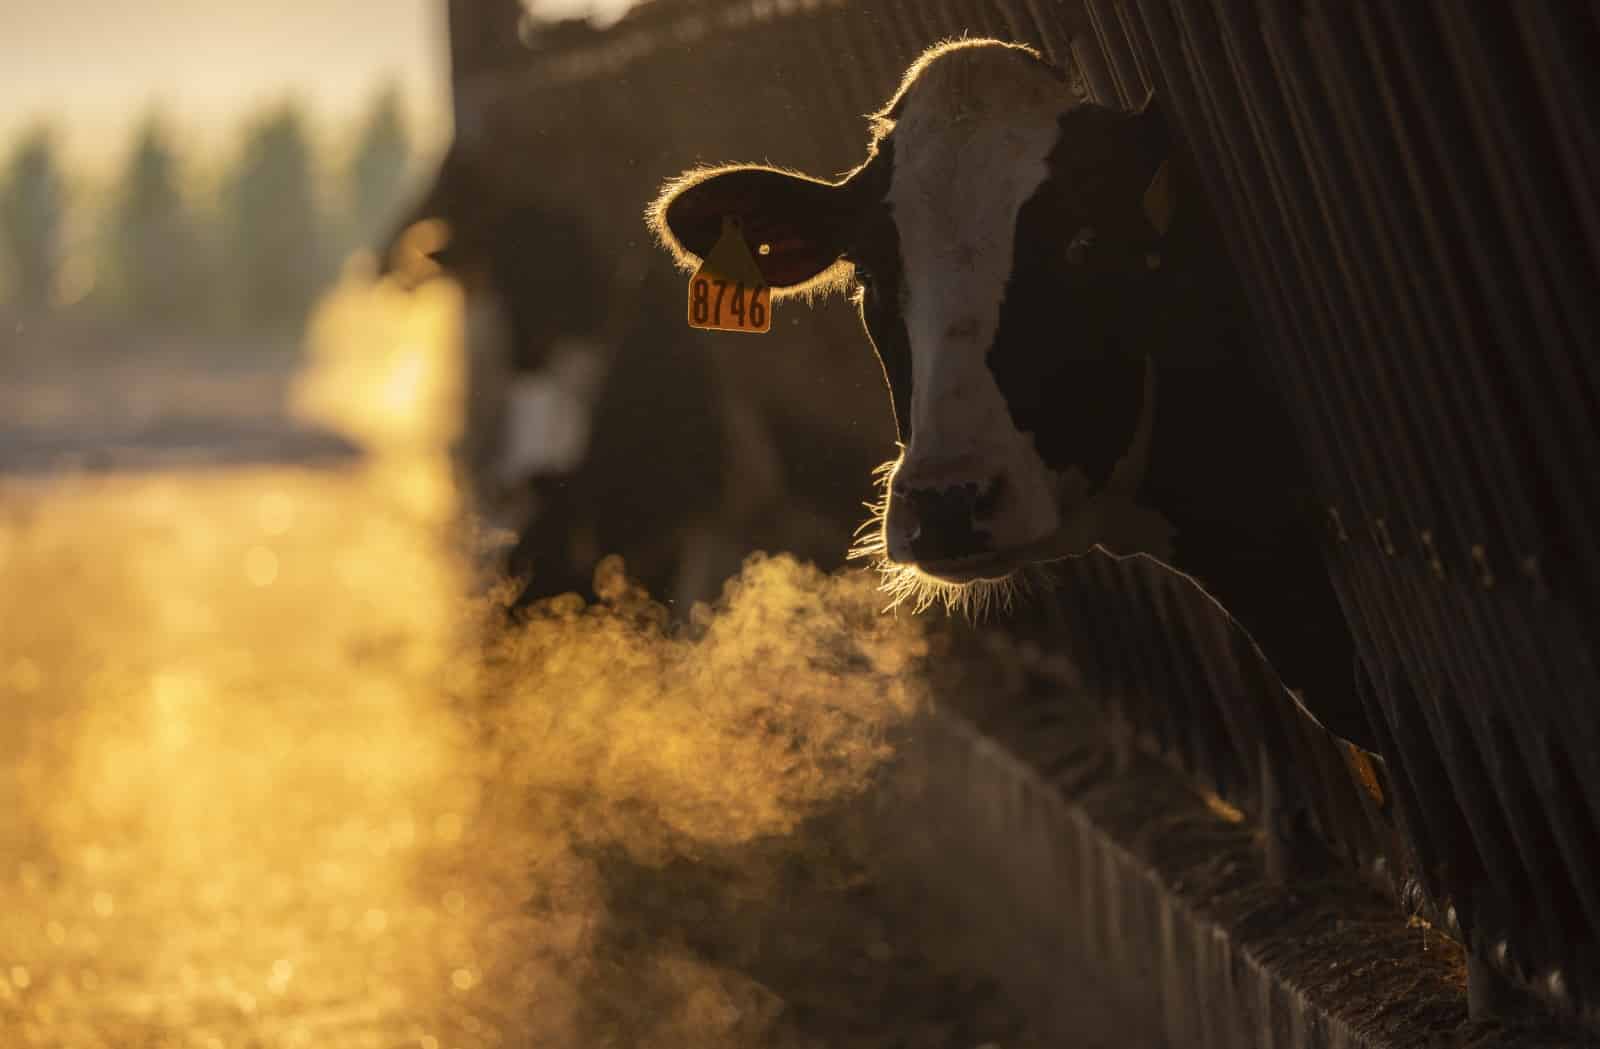 A state Environment Department effort to more stringently manage how large livestock operations manage and spread manure faltered under pressure from the Michigan Farm Bureau. Photo © J. Carl Ganter/ Circle of Blue